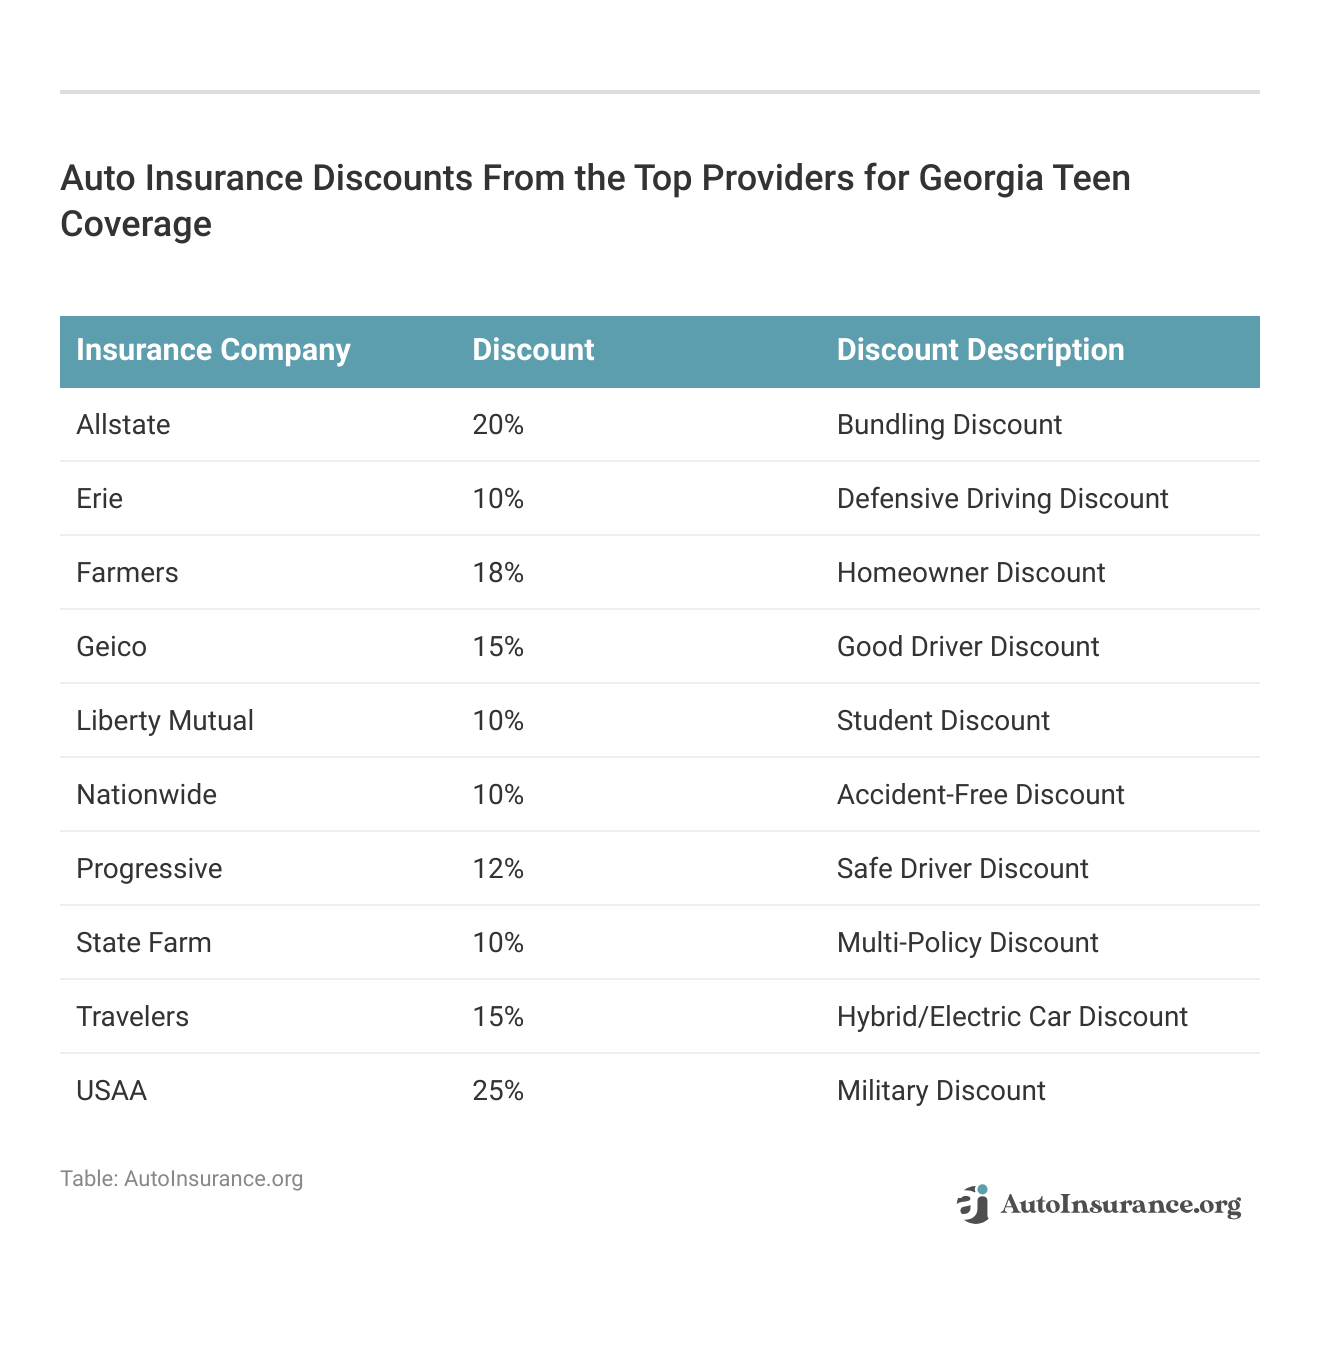 <h3>Auto Insurance Discounts From the Top Providers for Georgia Teen Coverage</h3>